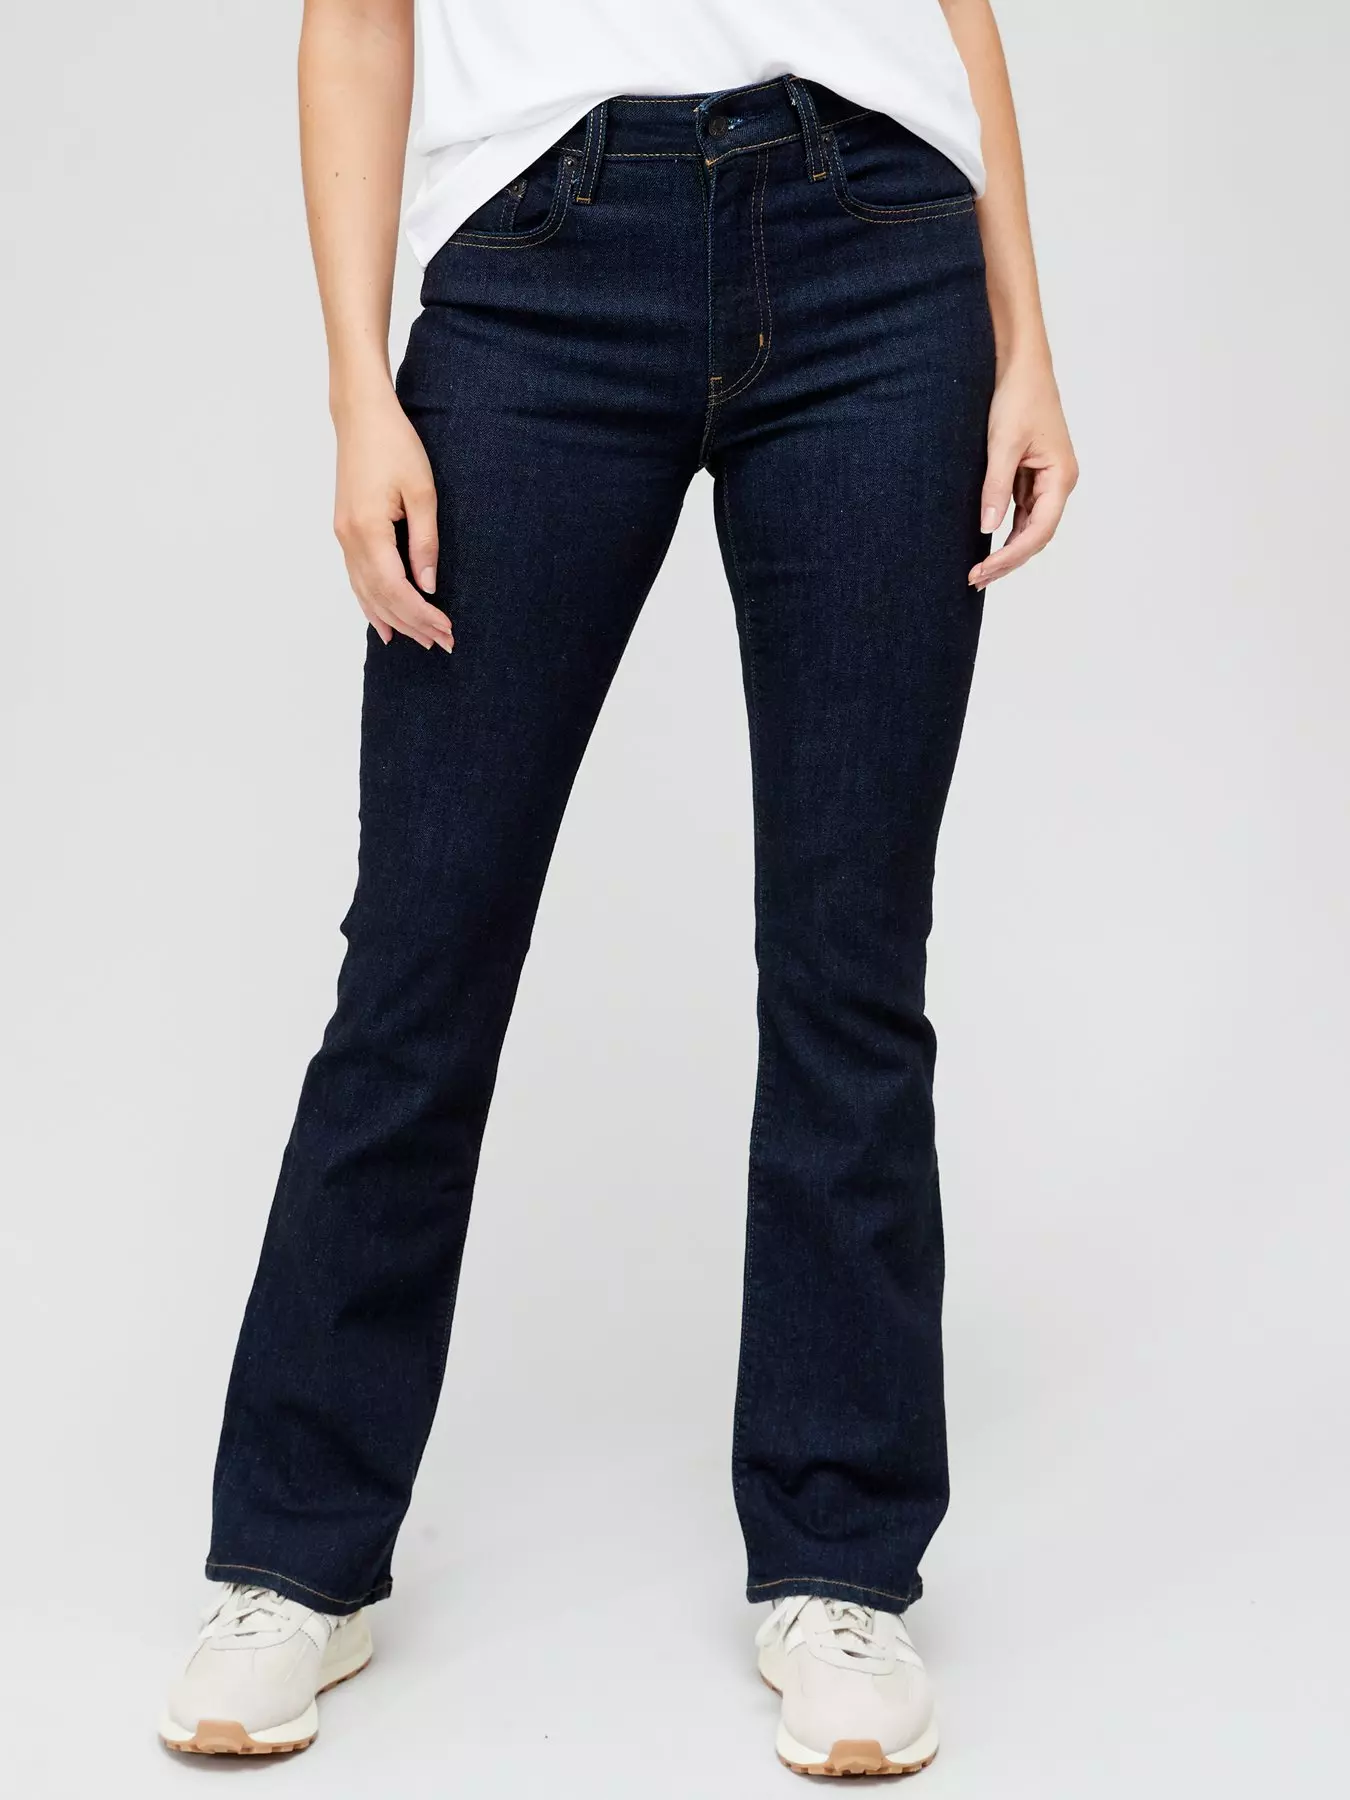 Product Name: Levi's Women's Dark Horse High Rise 725 Bootcut Jeans